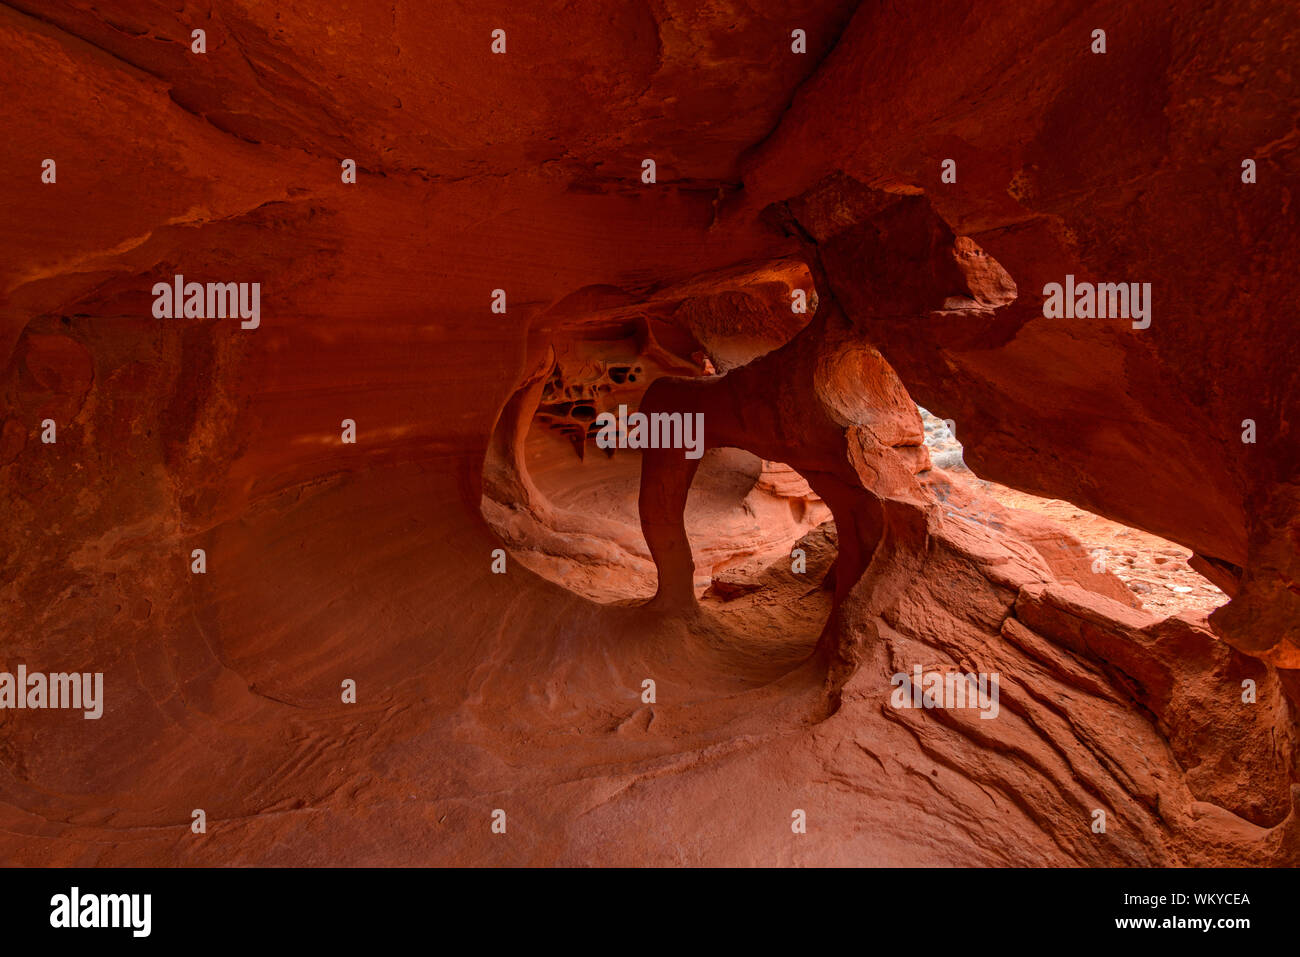 Windstone Arch, Valley of Fire State Park, Nevada, USA Stockfoto